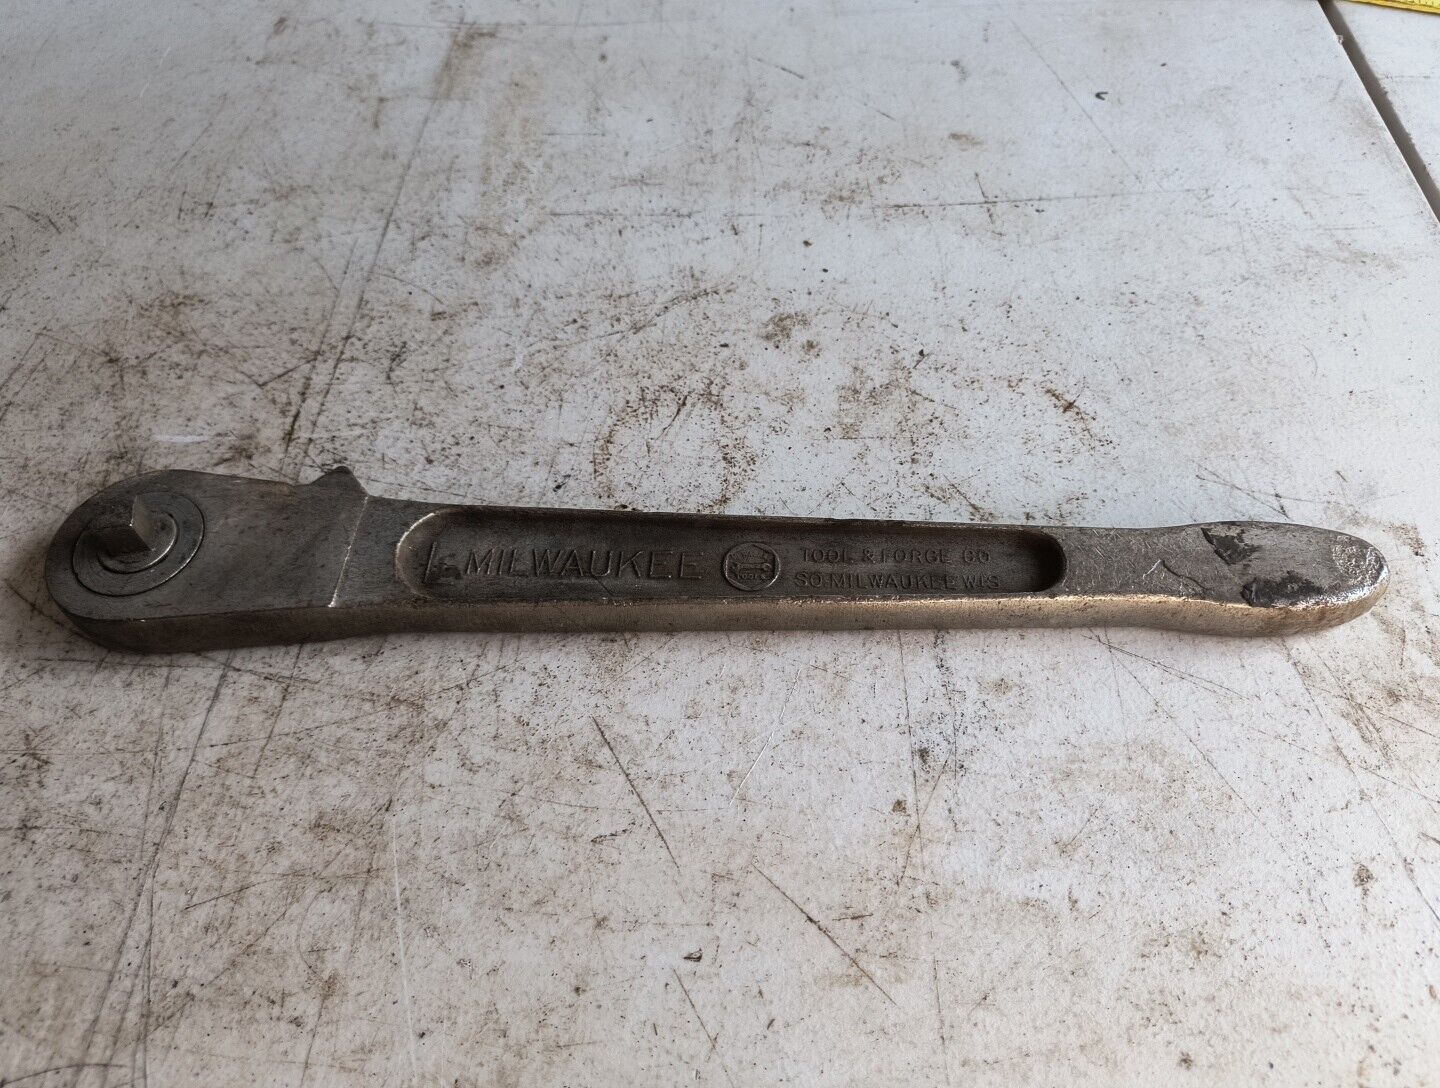 Vintage Milwaukee tool and forge company. 1/2 inch Push Through ratchet.